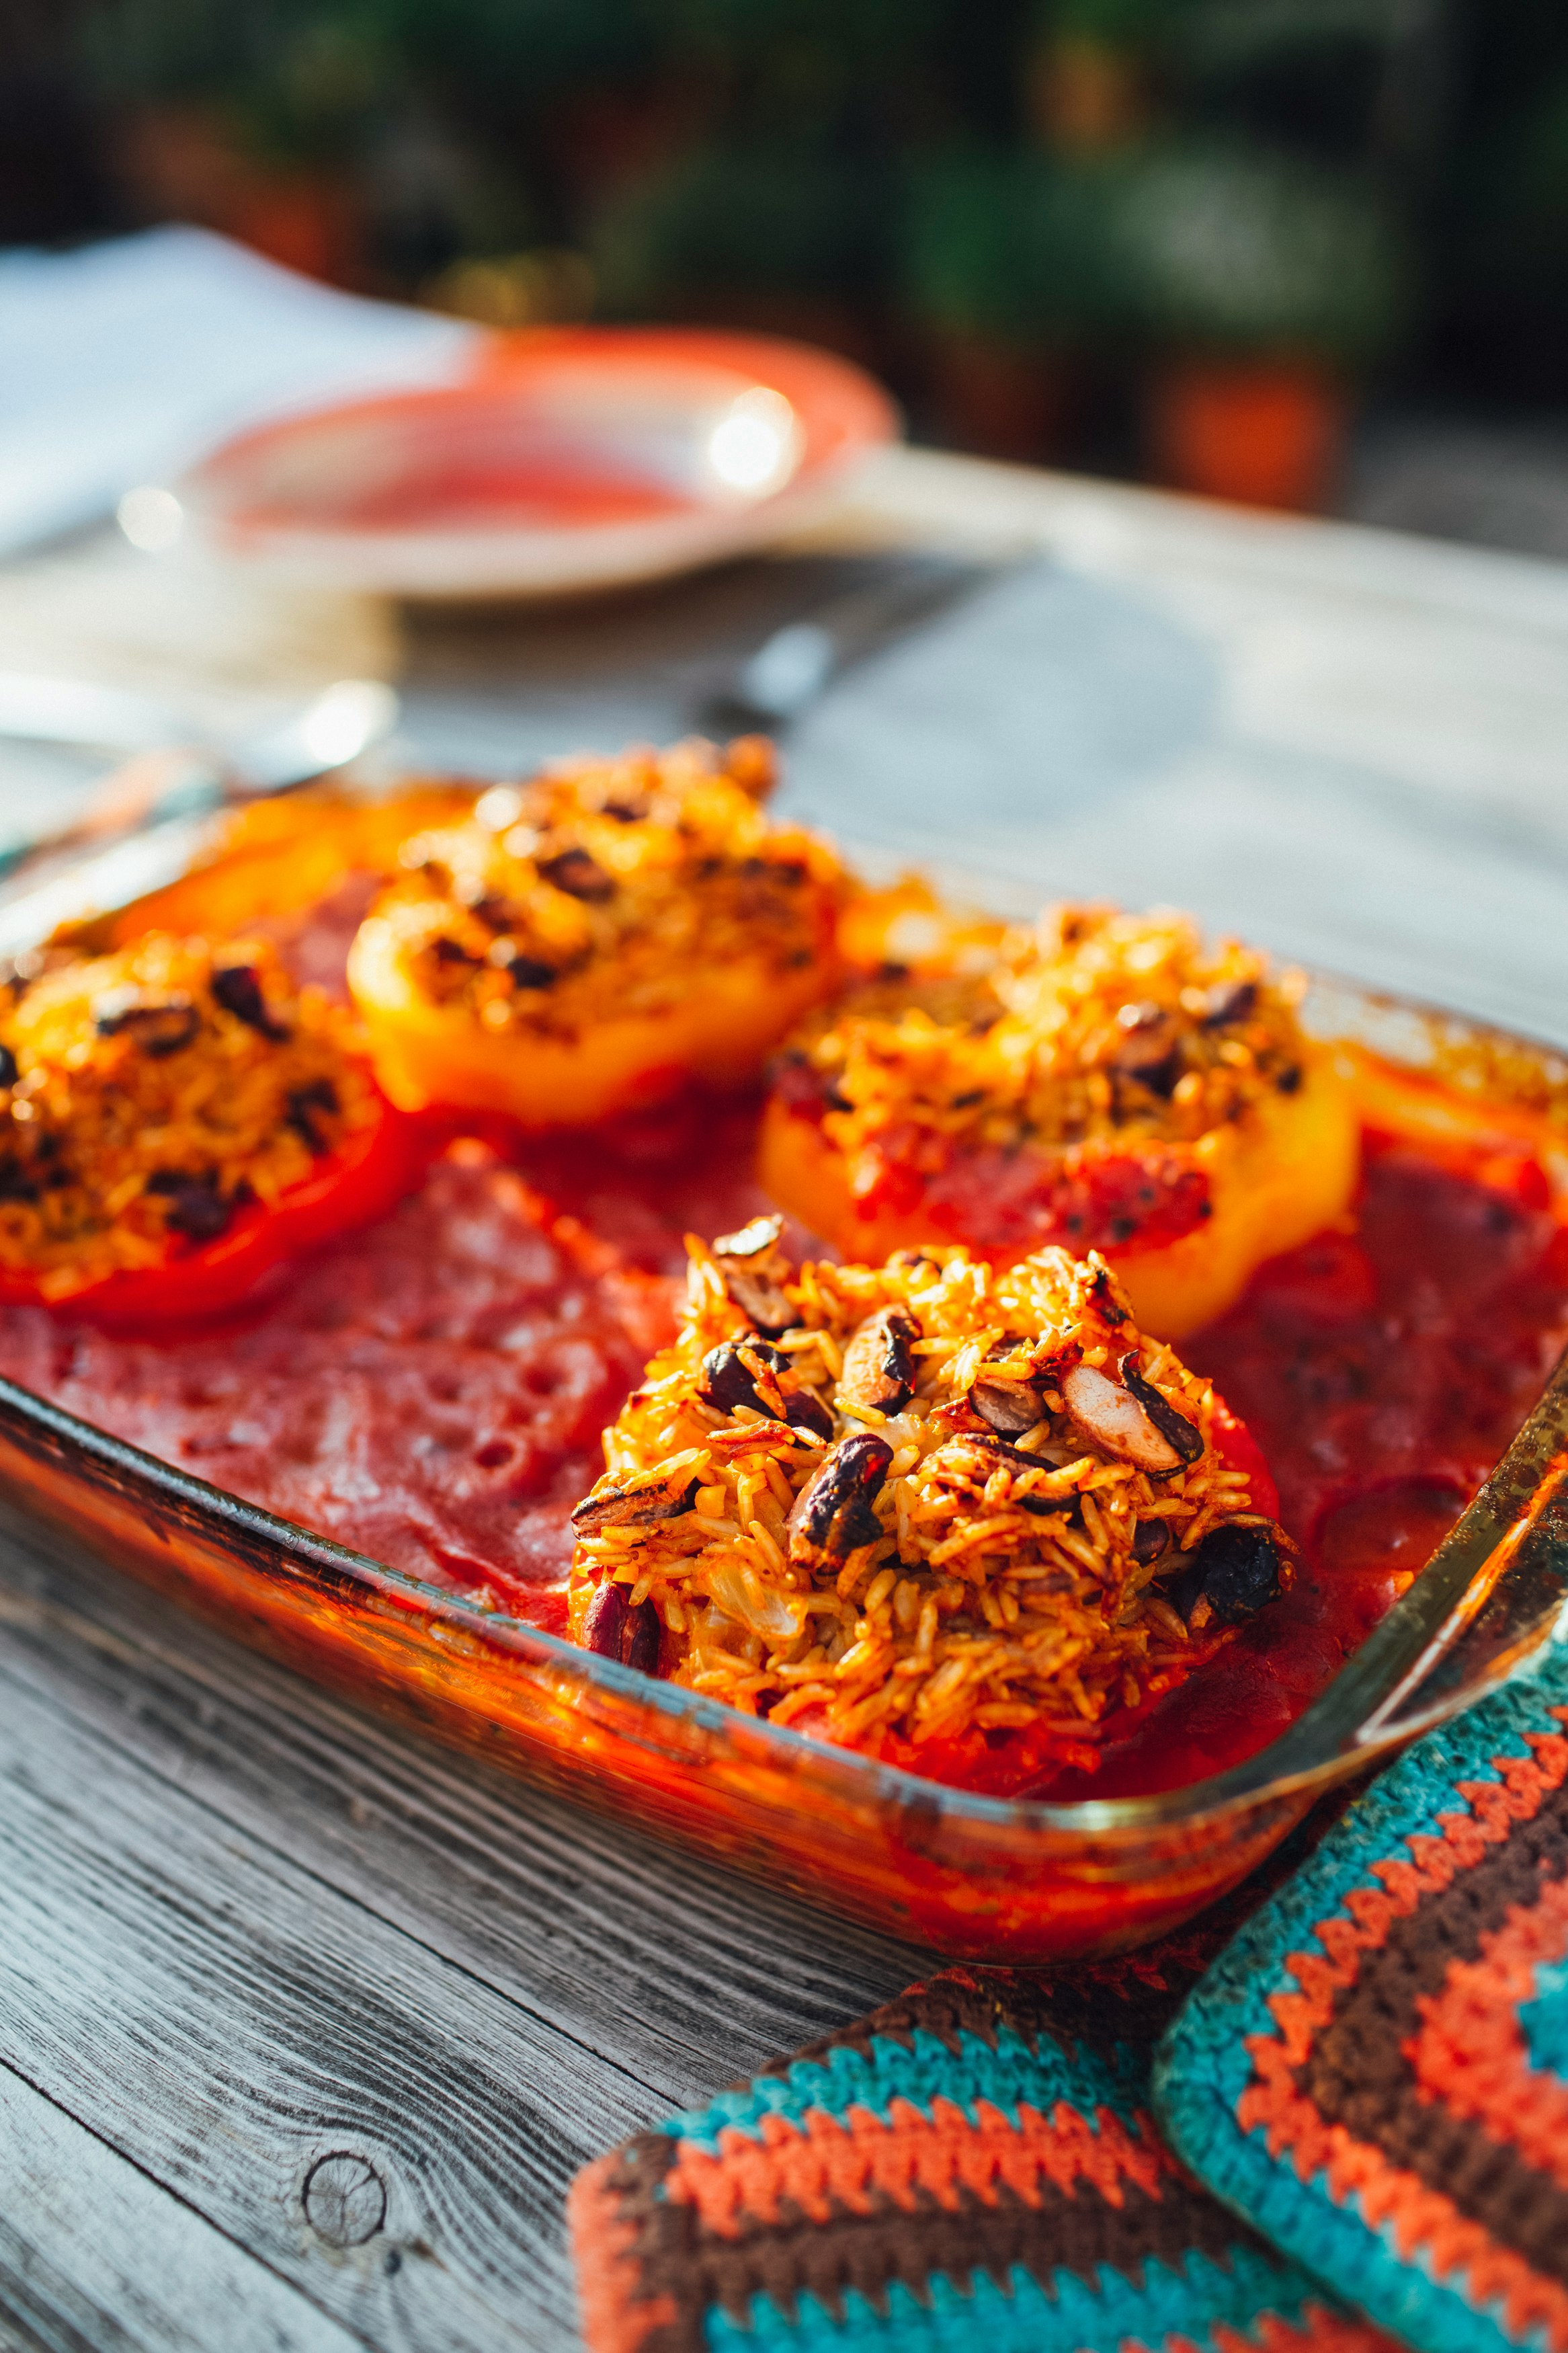 Vegan cuisine – Casserole stuffed peppers with rice and beans